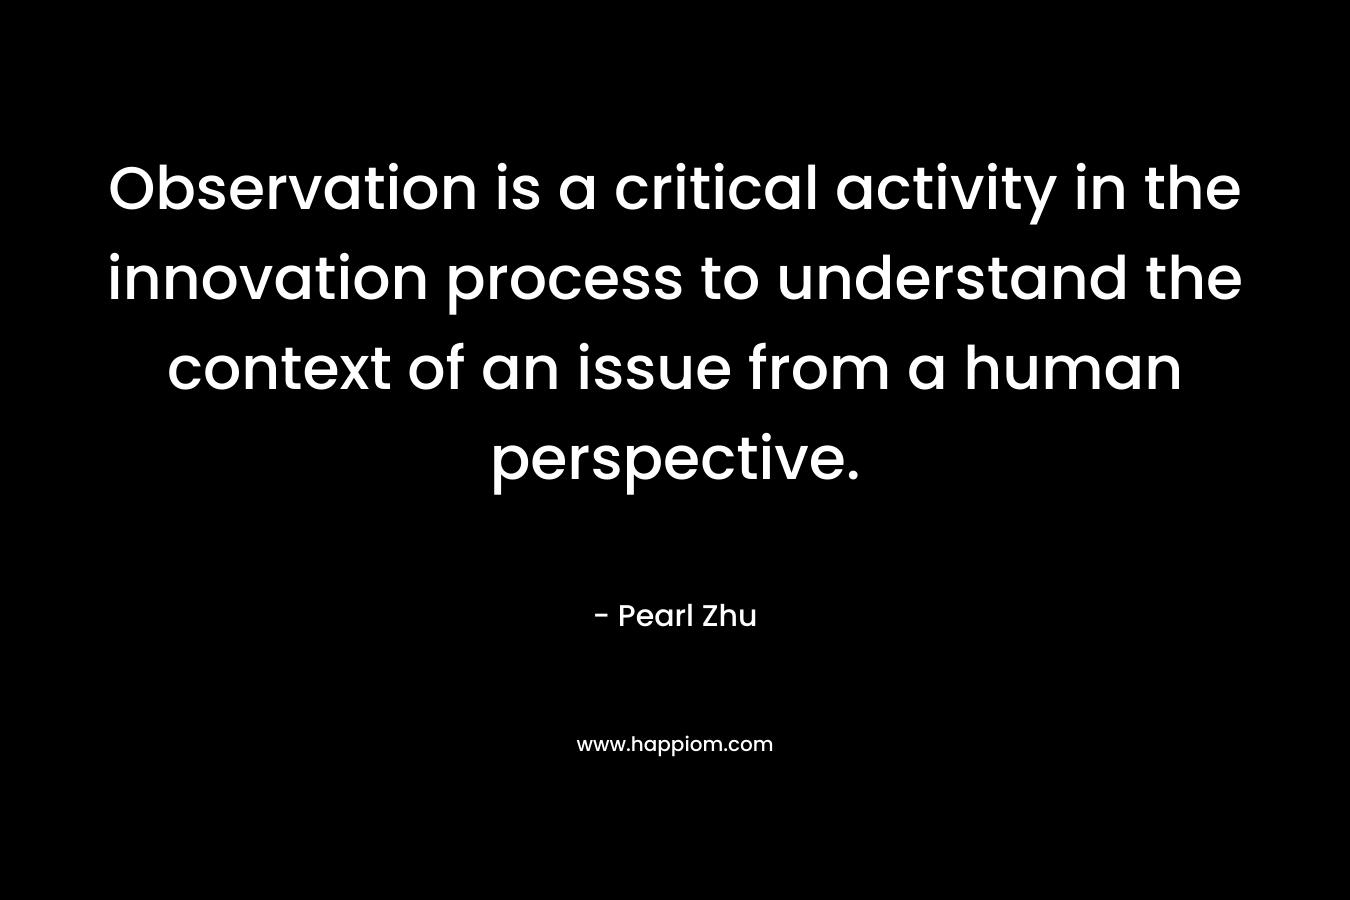 Observation is a critical activity in the innovation process to understand the context of an issue from a human perspective. – Pearl Zhu